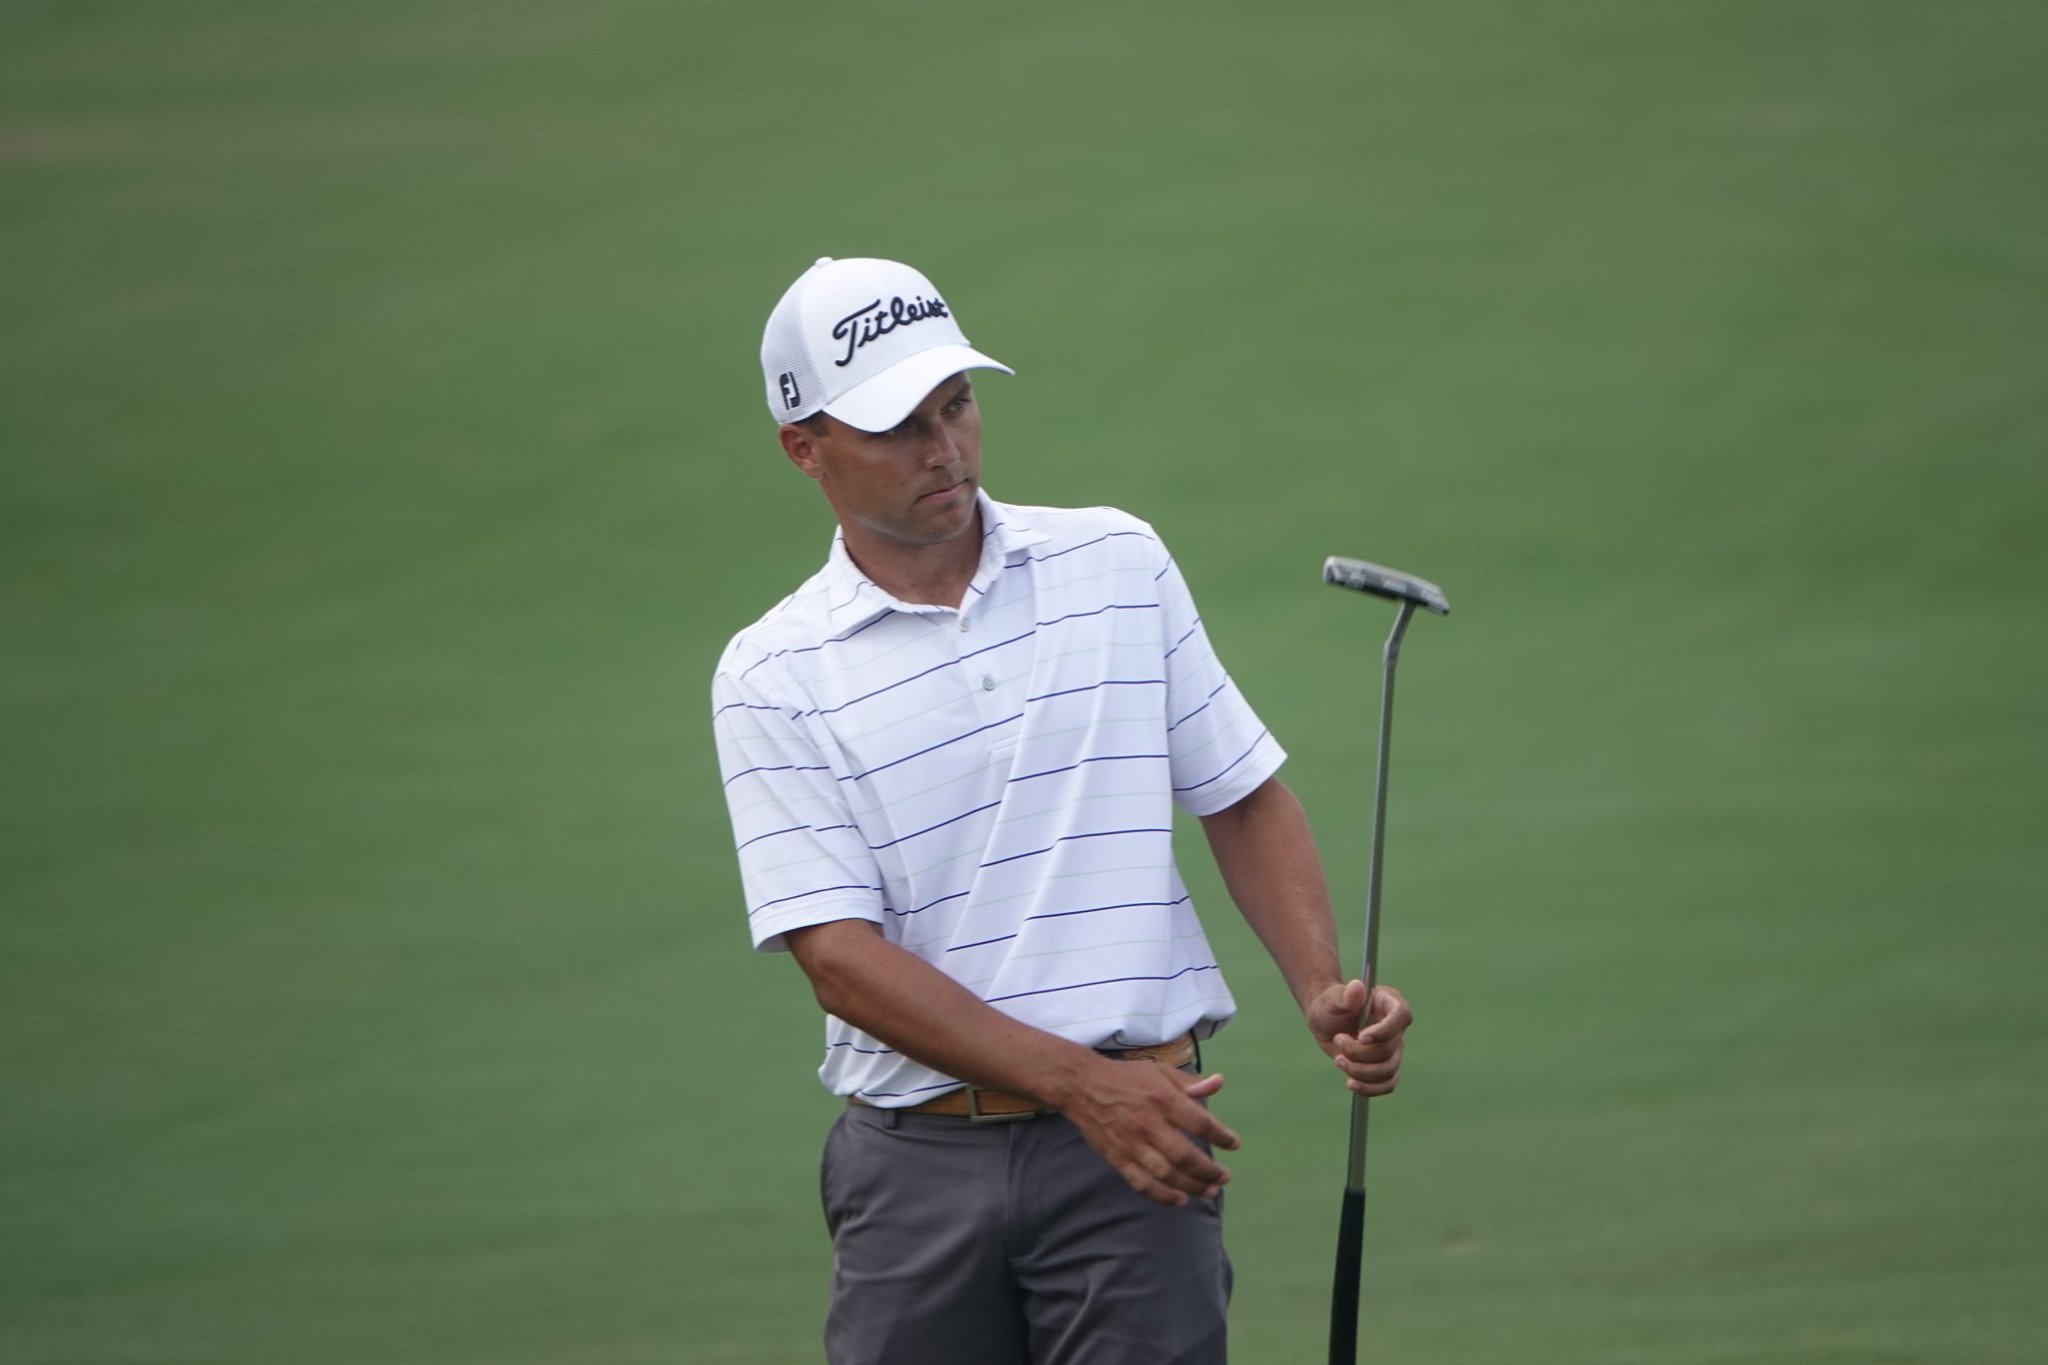 Eric Cole leads after the first day of the 2023 PGA Championship